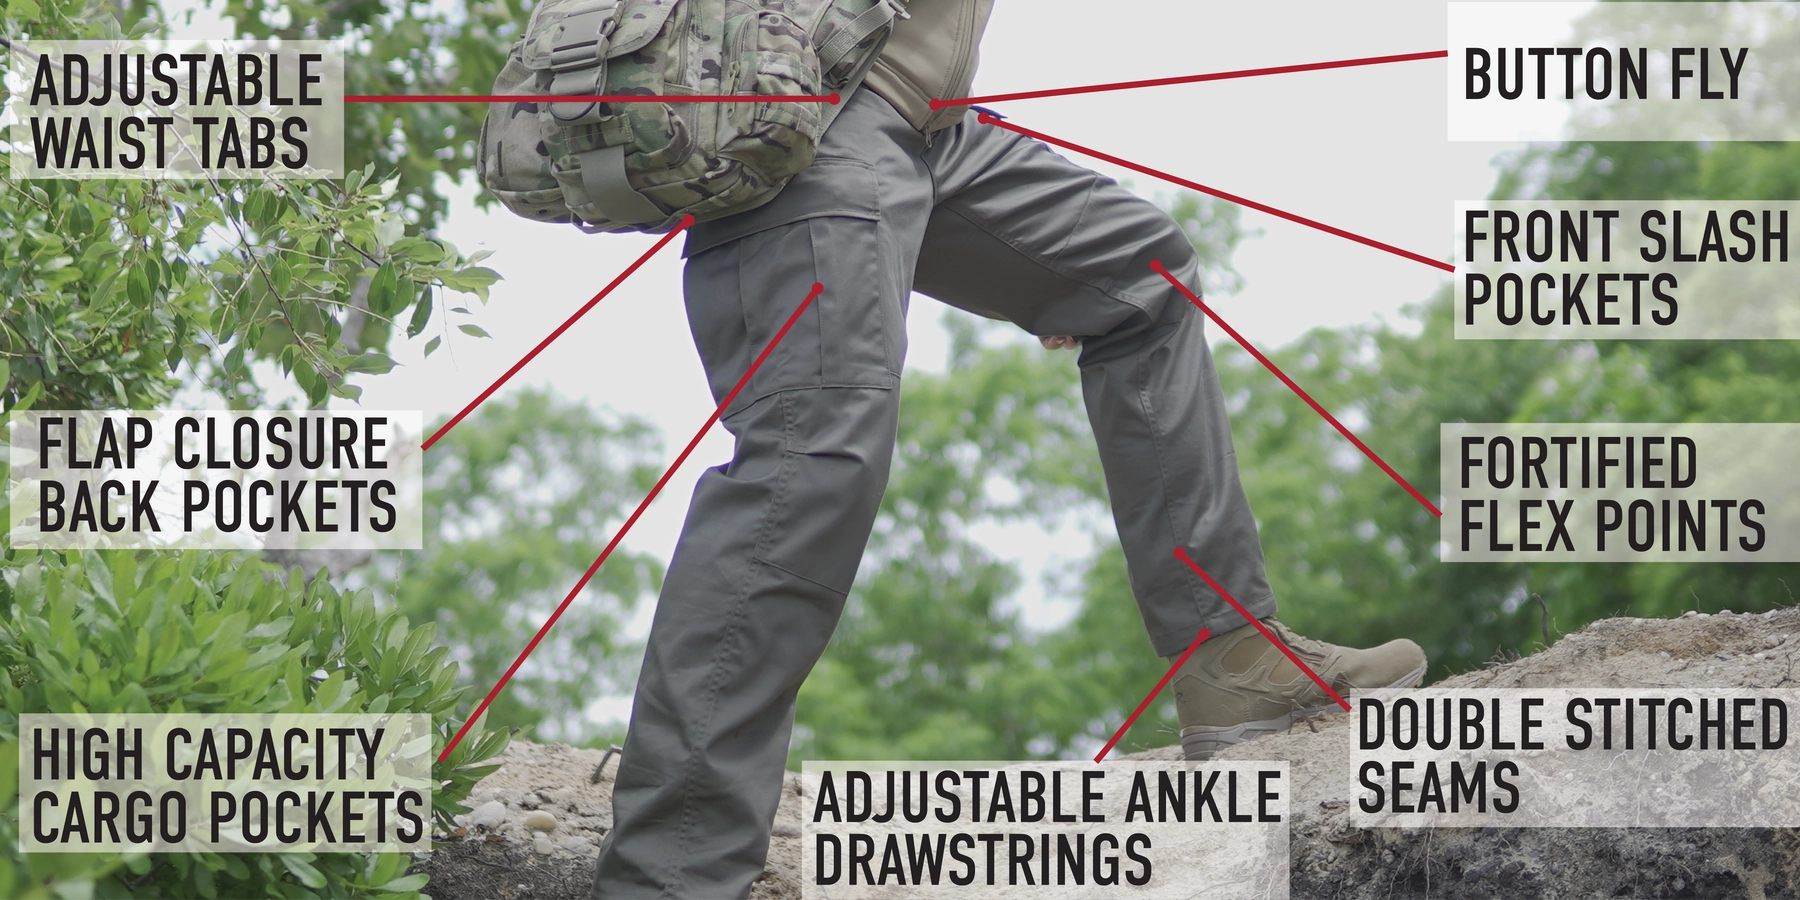 Banner image showing off the new cargo pants features such as adjustble waist tab, high capacity cargo pockets, and double stitched seams.